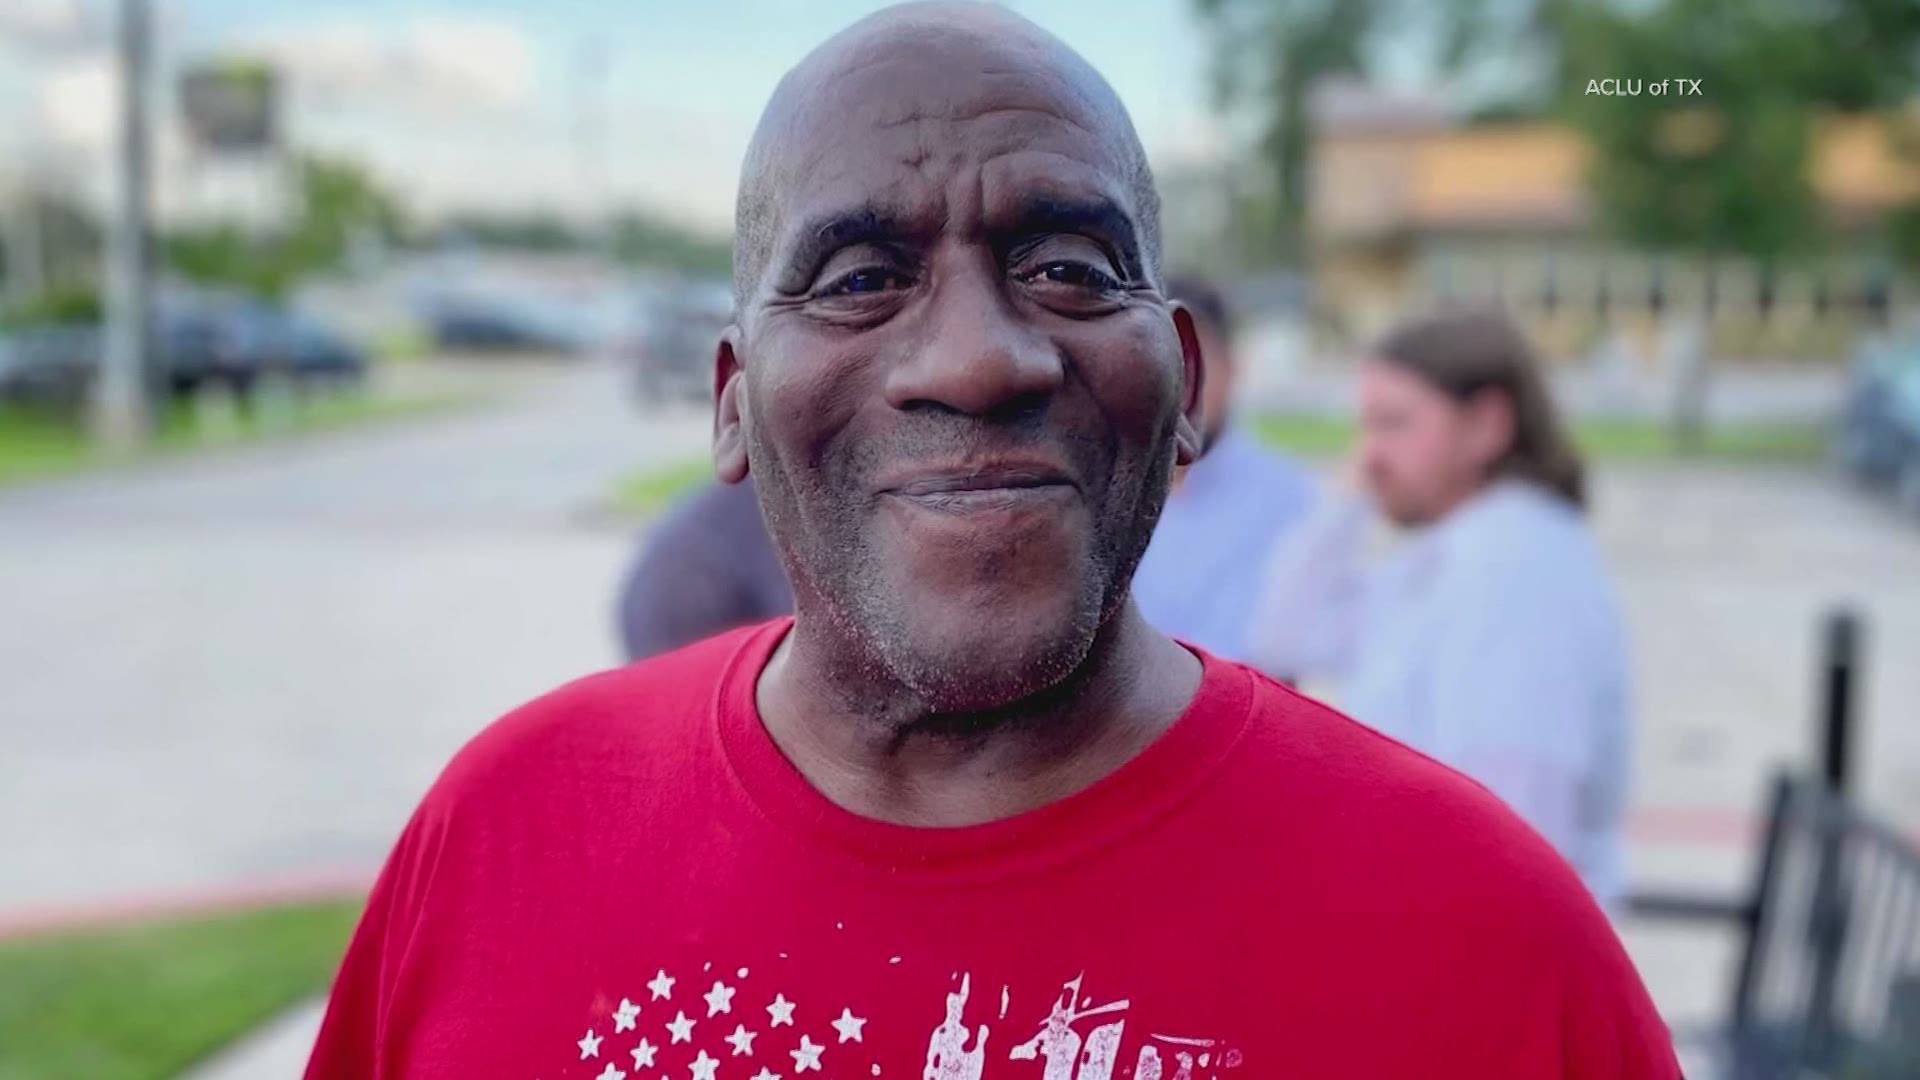 A Houston man who waited more than 6 hours to vote in the 2020 election is now being charged with having voted while being ineligible to vote.